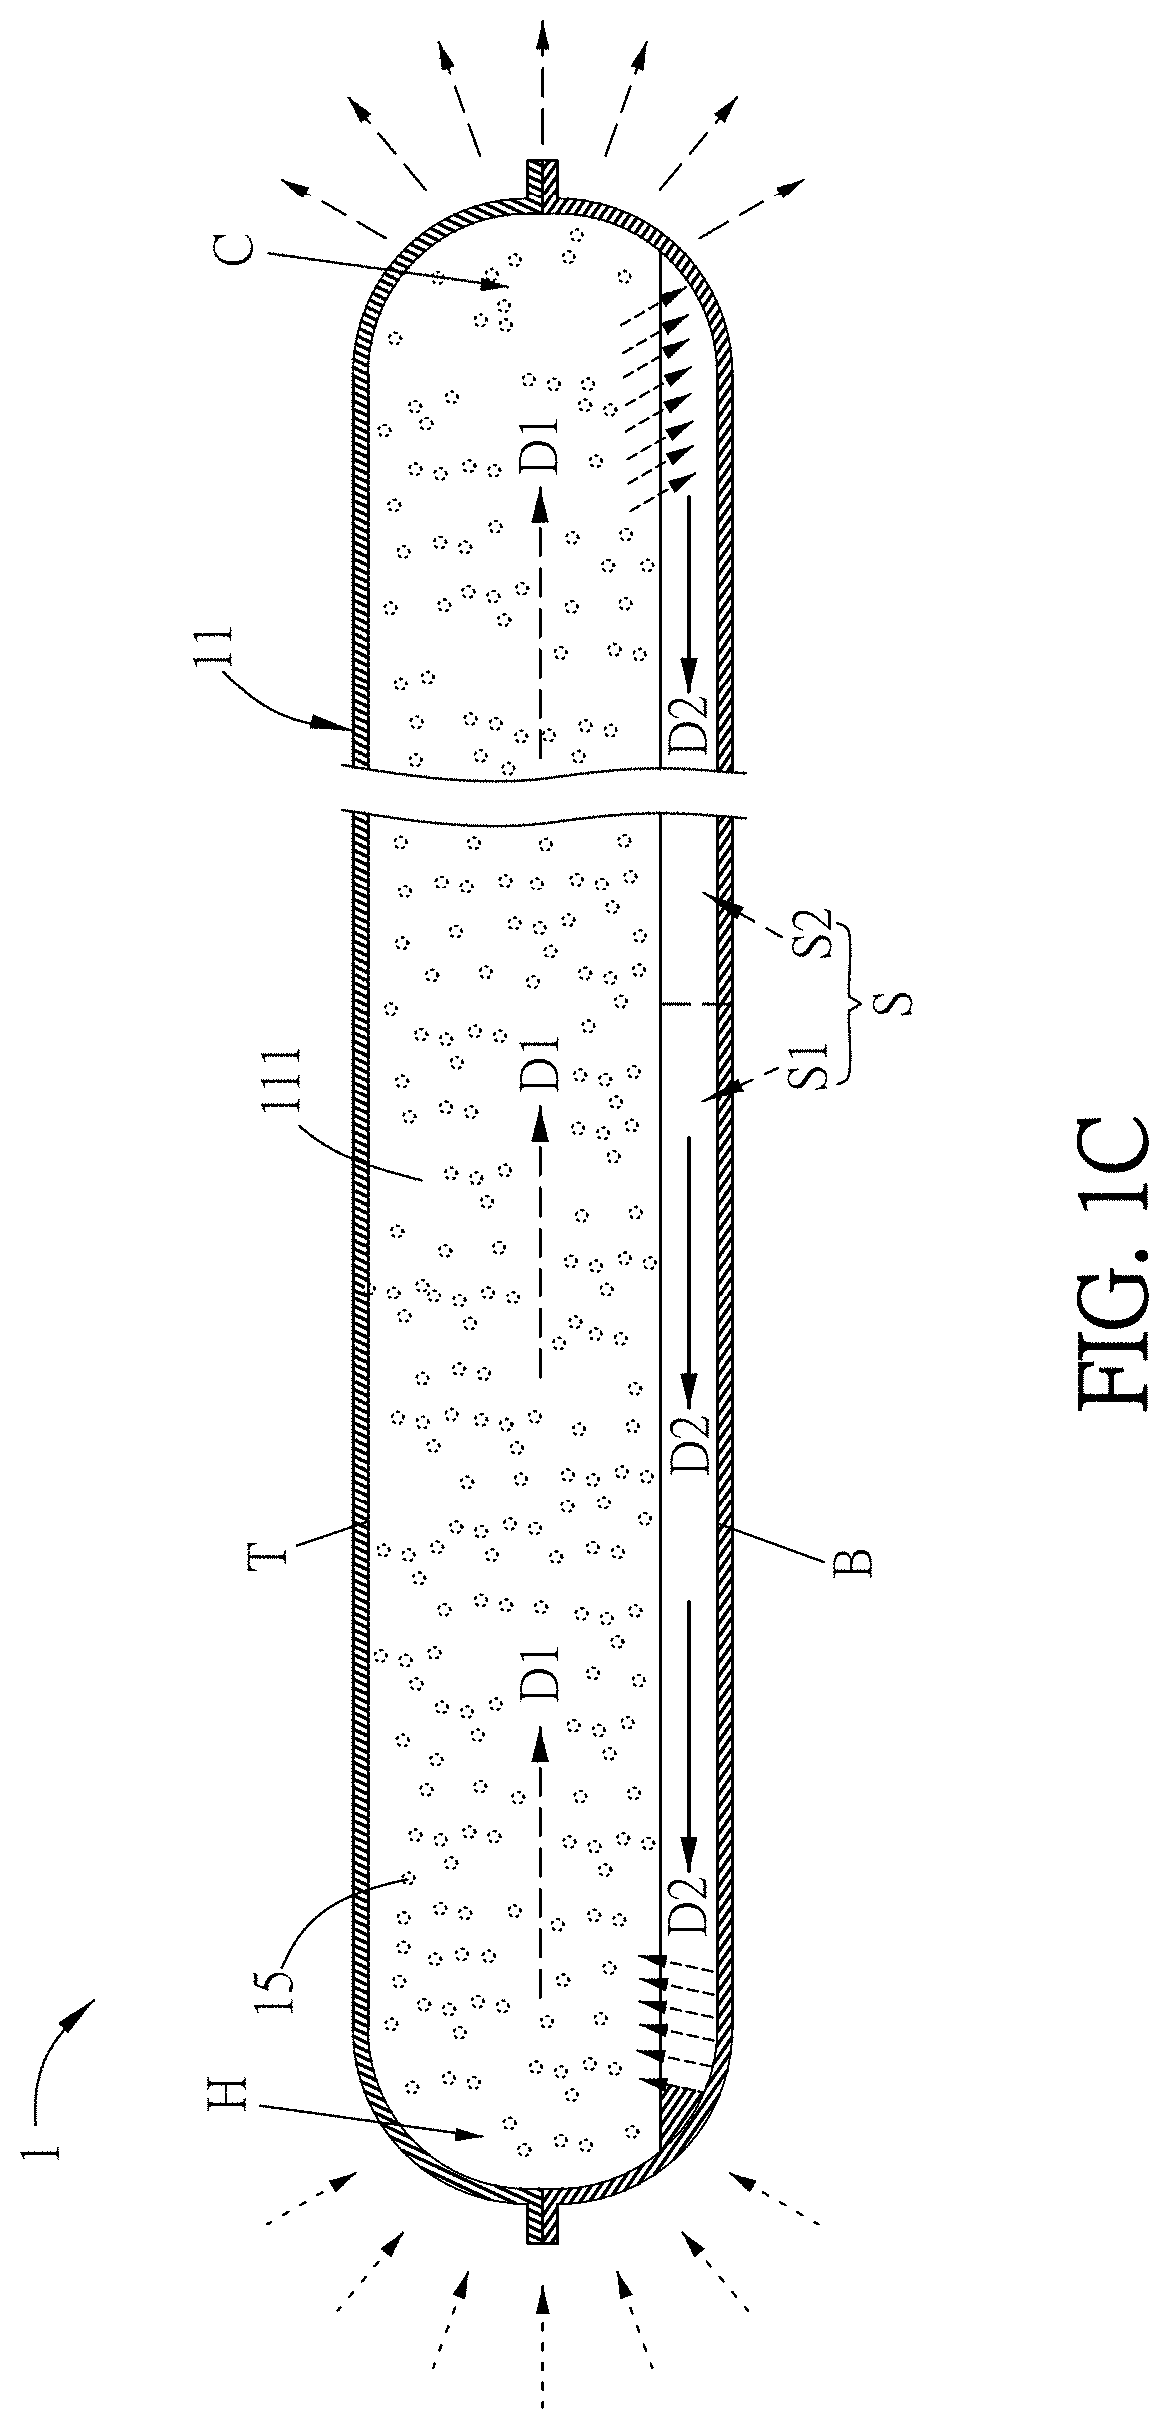 Heat conducting structure, manufacturing method thereof, and mobile device